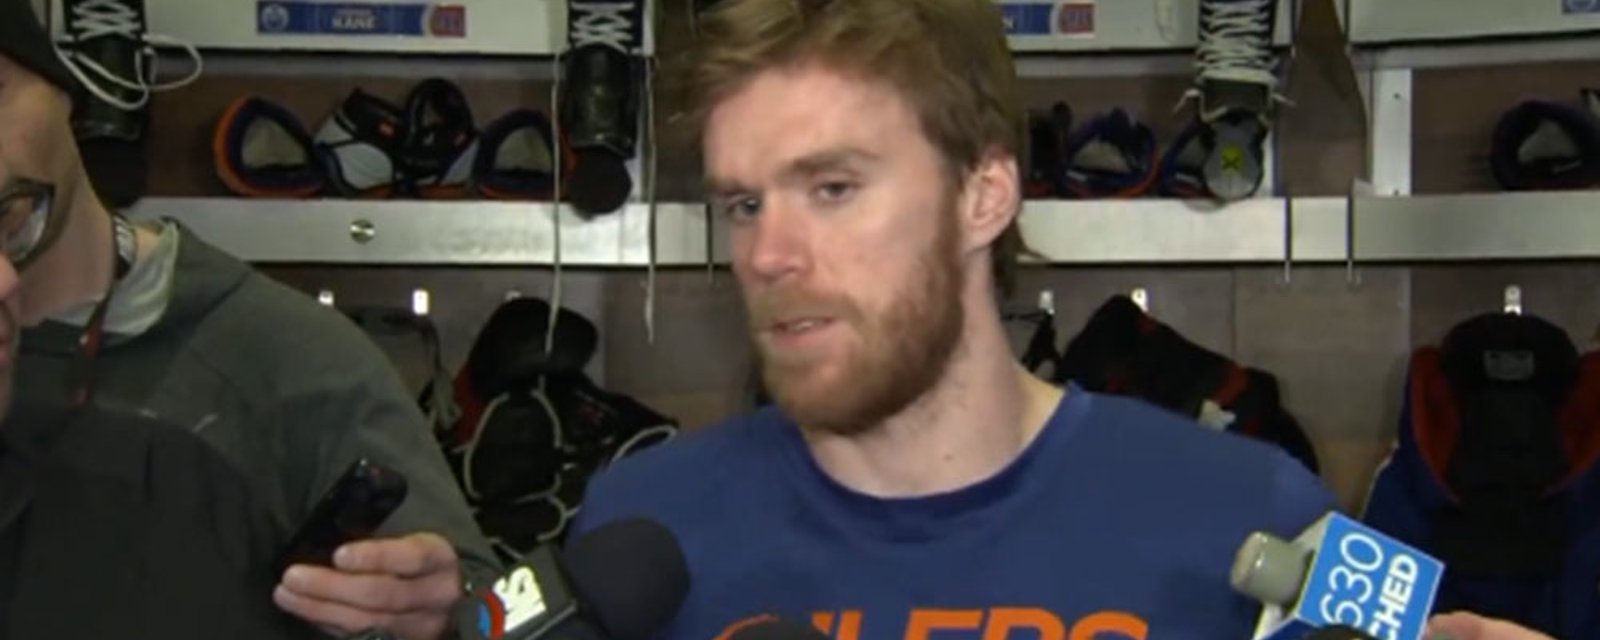 Connor McDavid trolls fans and media before huge game against Kings